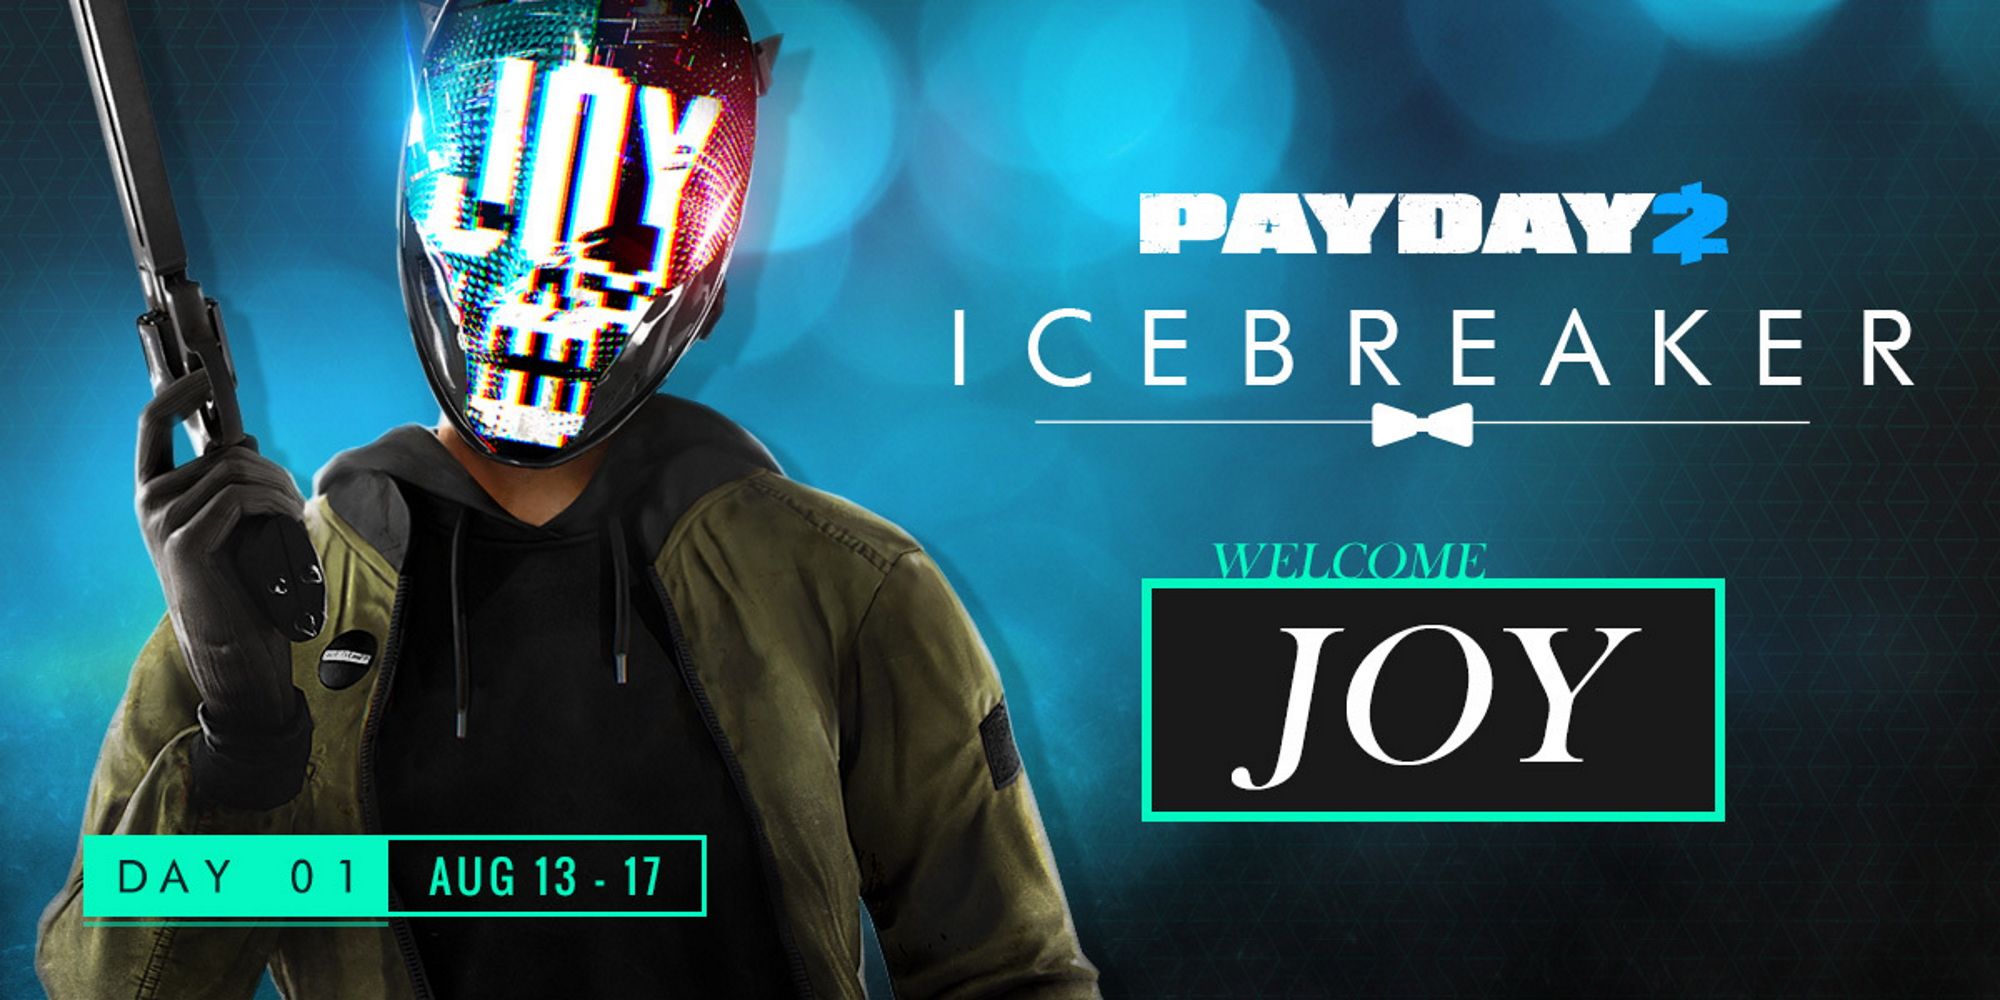 Joy from PAYDAY 2